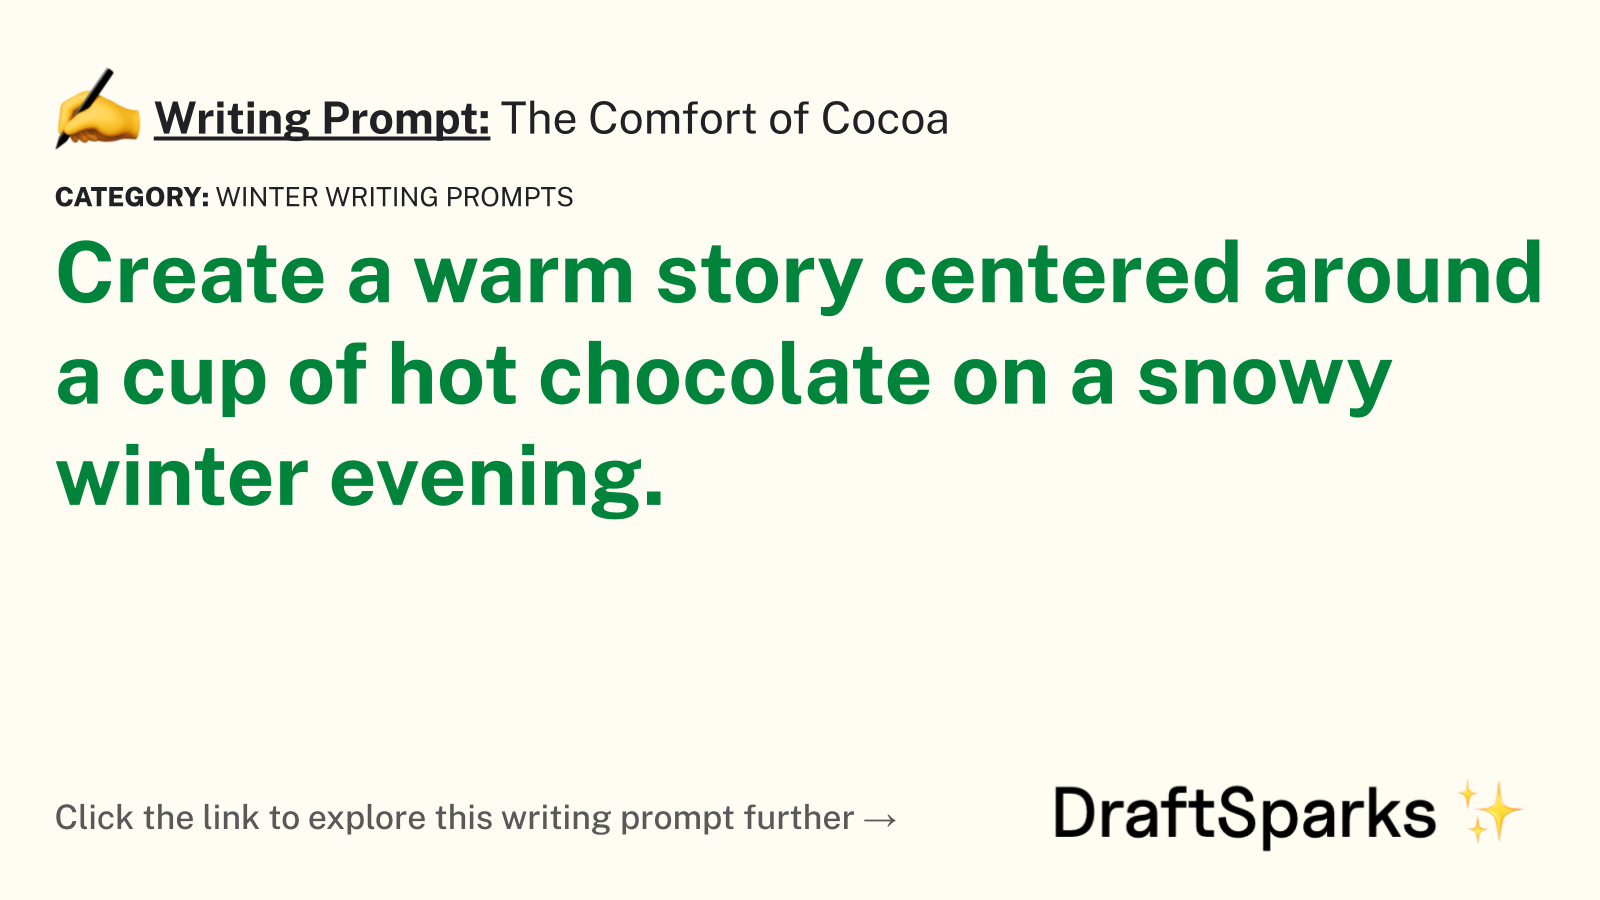 The Comfort of Cocoa